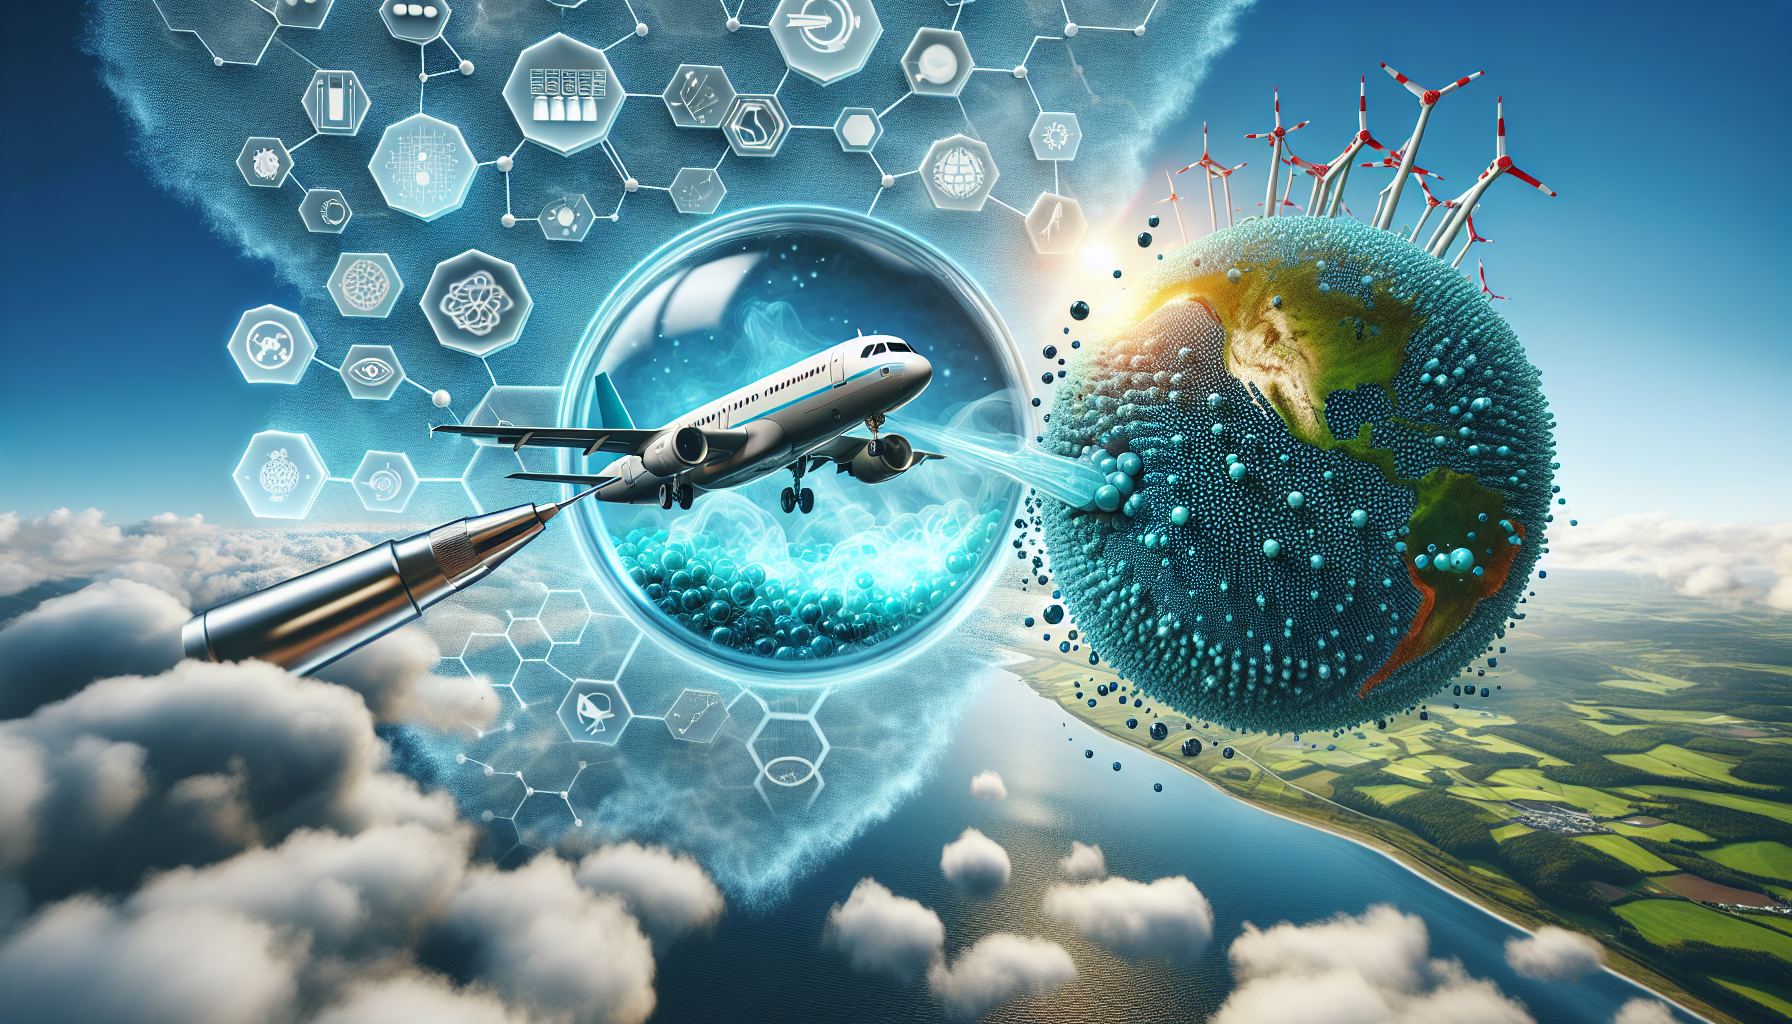 Study Proposes that 'Nanosphere' Paint Could Reduce CO2 Emissions from Airplanes